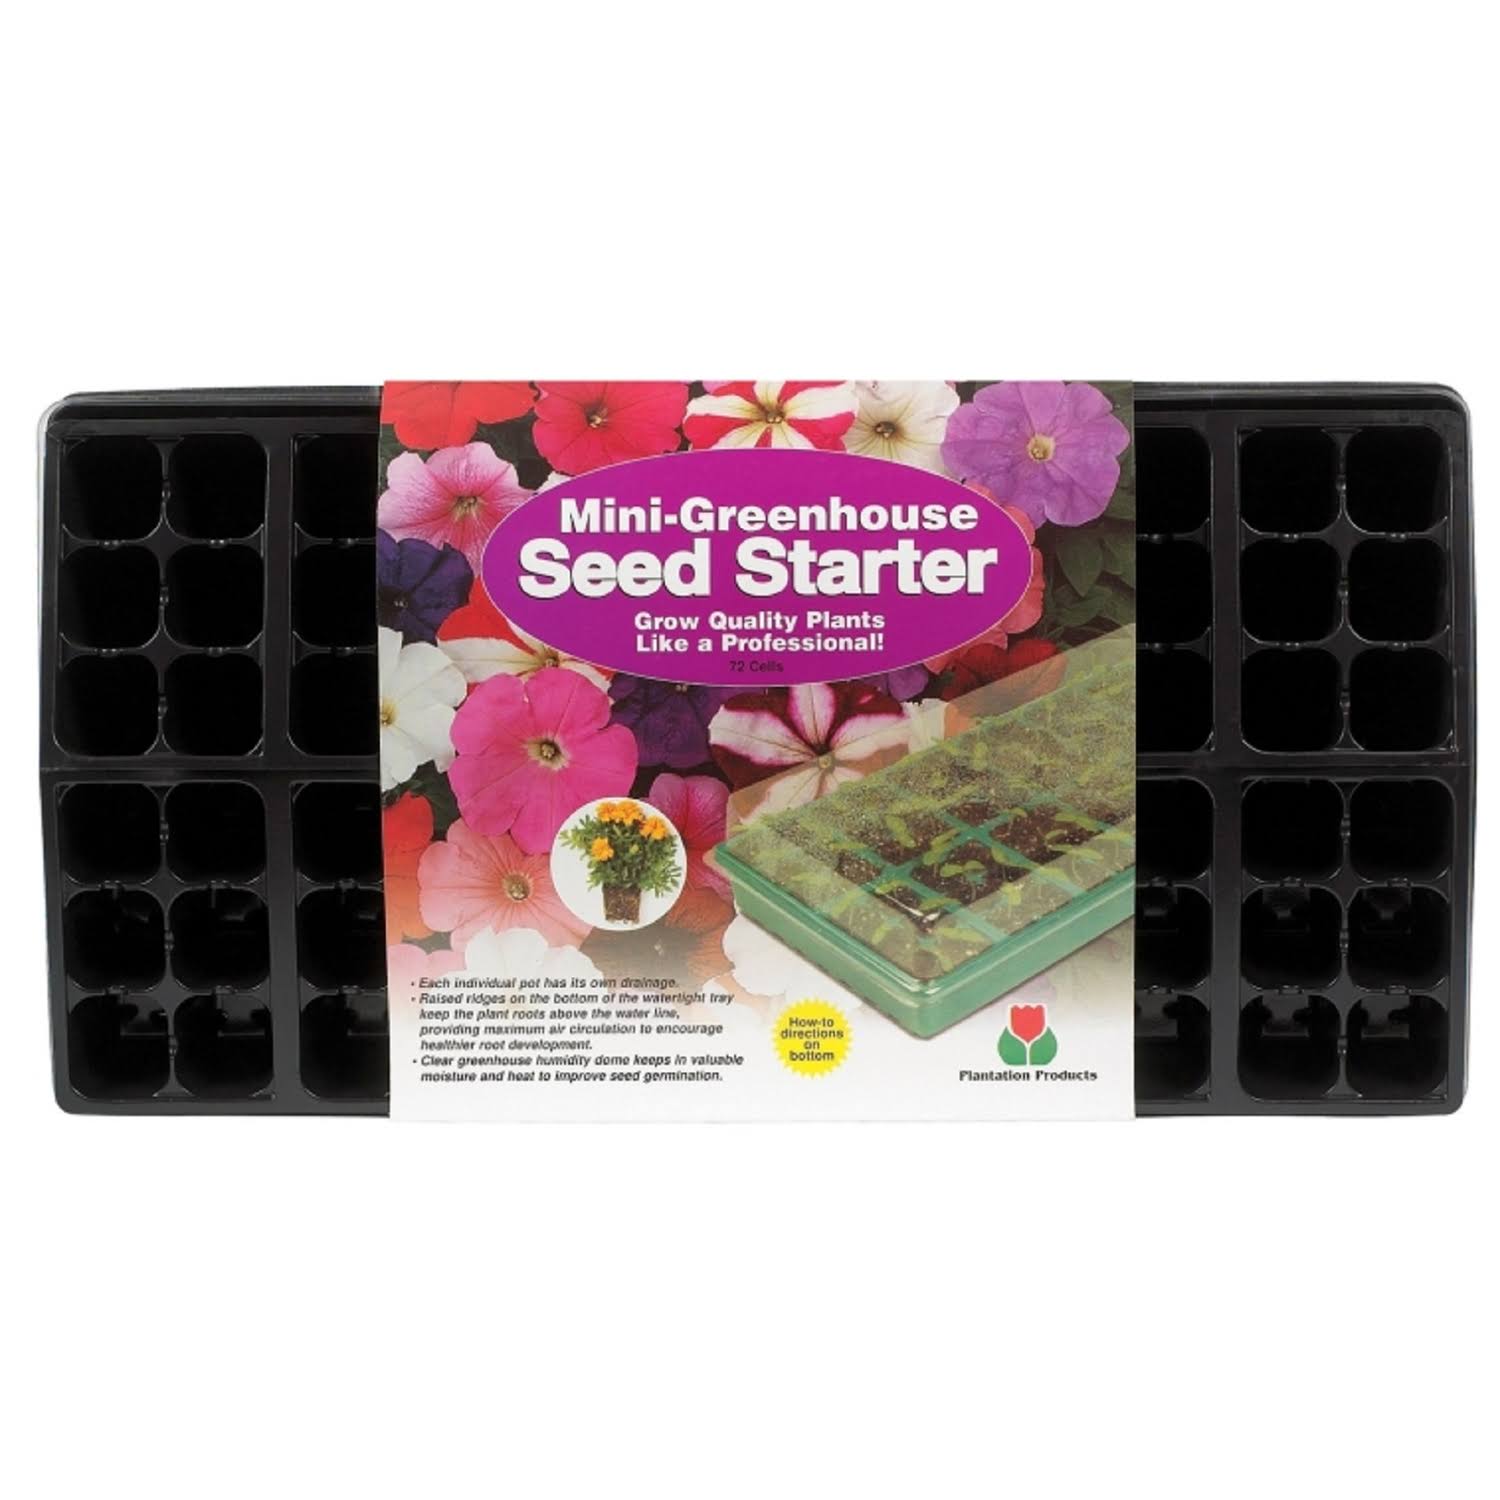 Plantation Products Seed Starter Kit